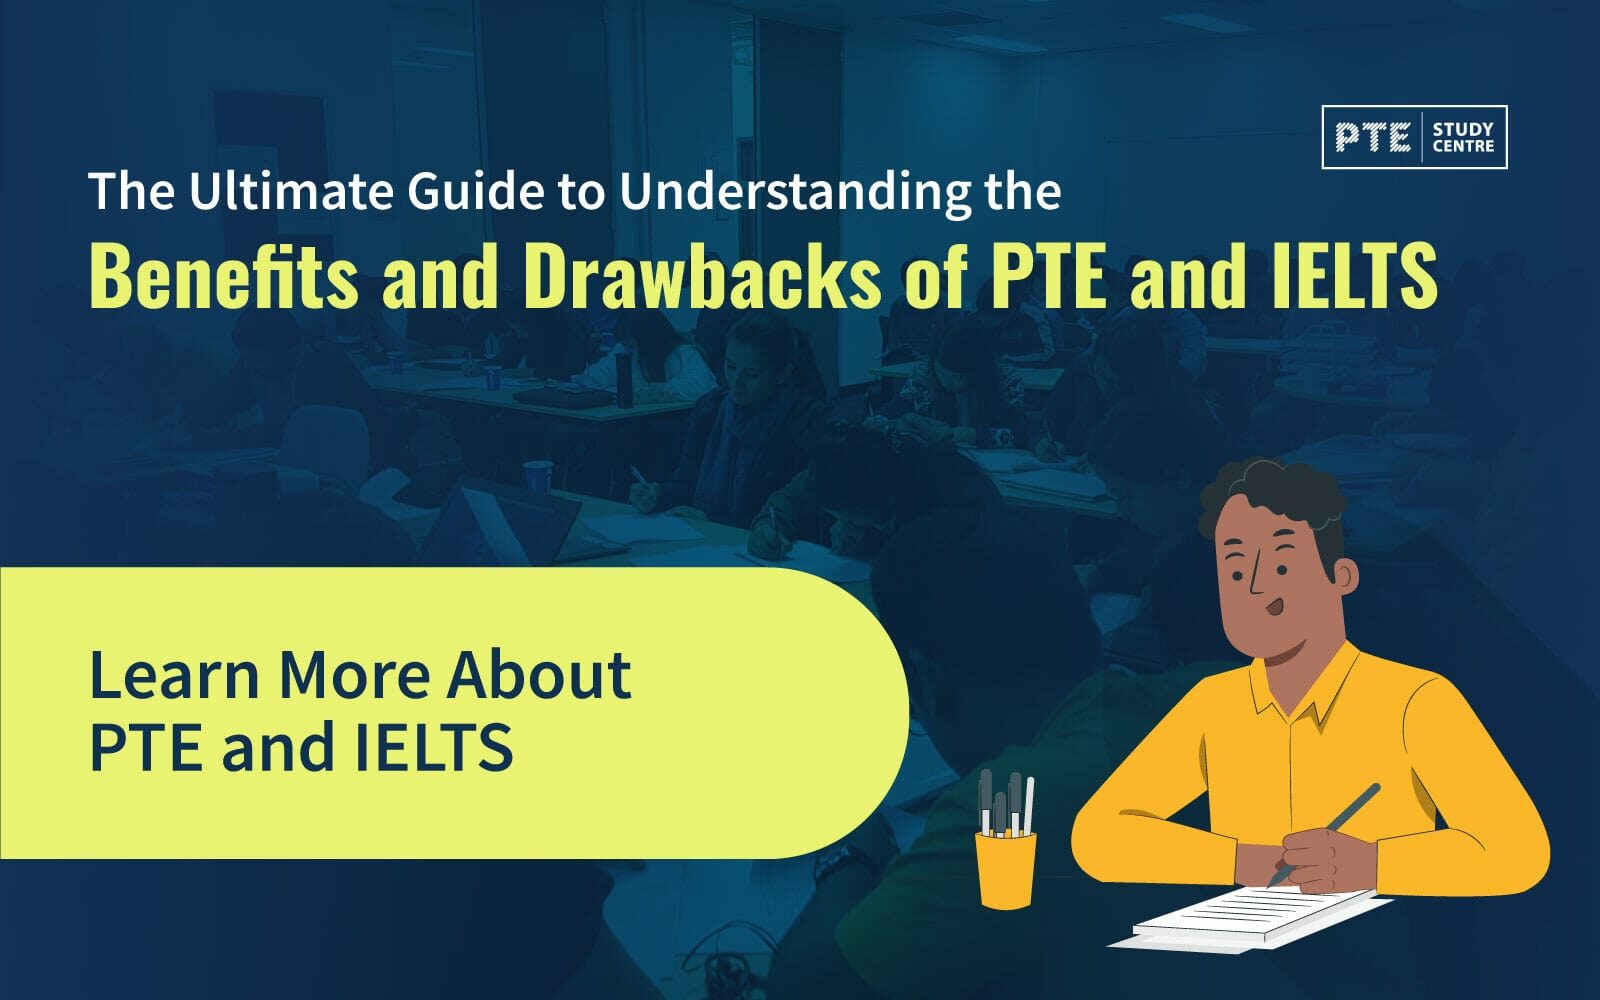 The Ultimate Guide to Understanding the Benefits and Drawbacks of PTE and IELTS